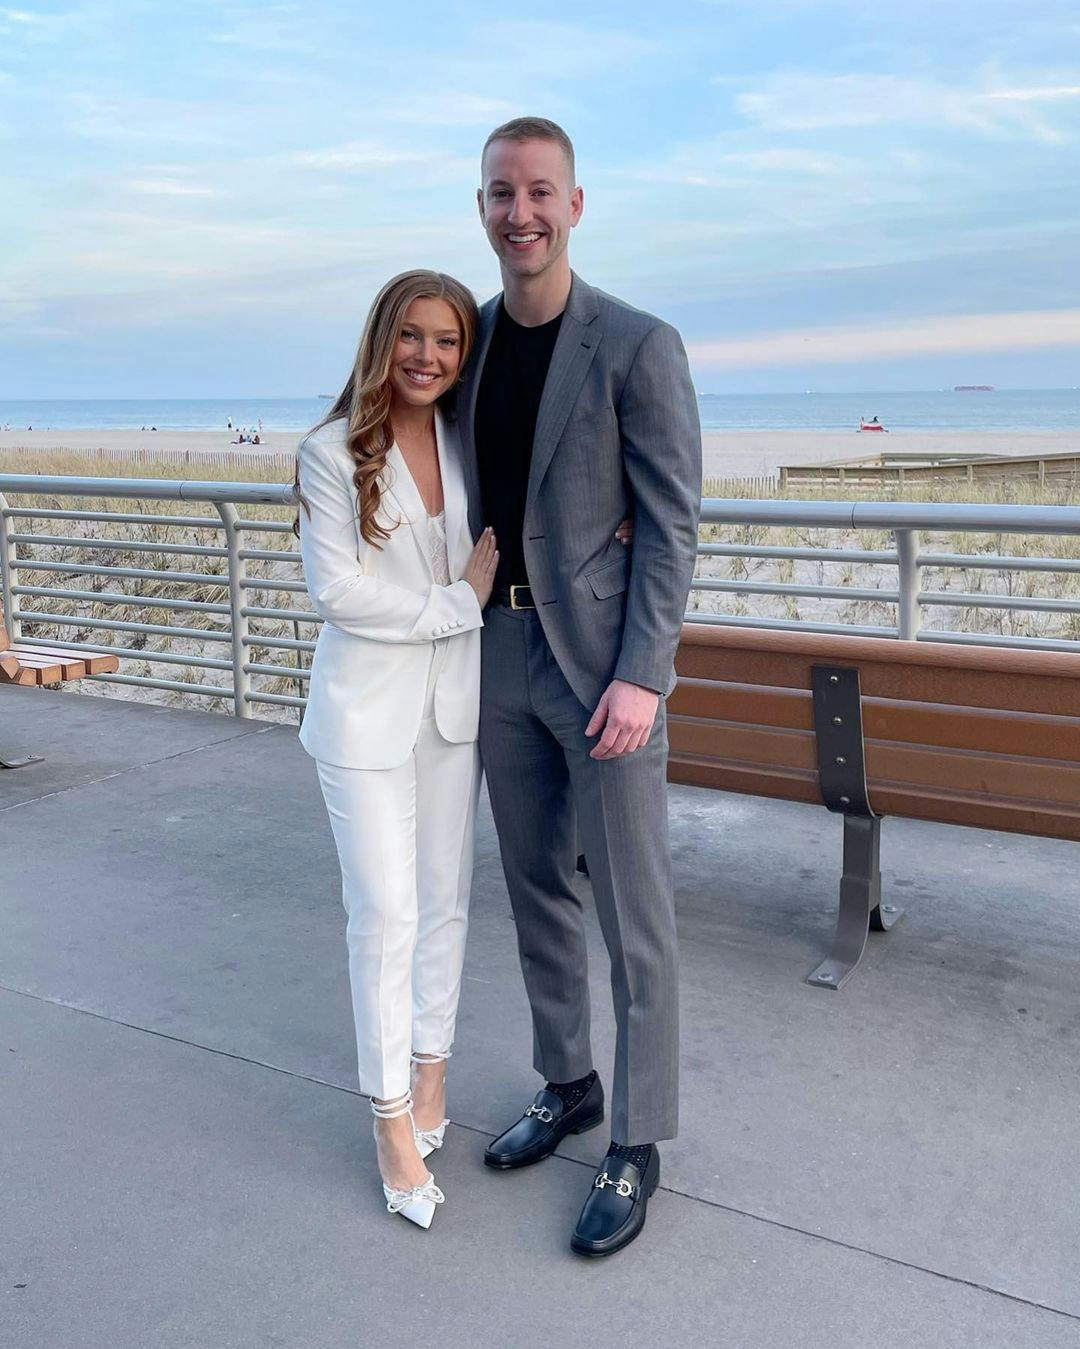 Bride-to-be sporting the White Tuxedo to her rehearsal dinner